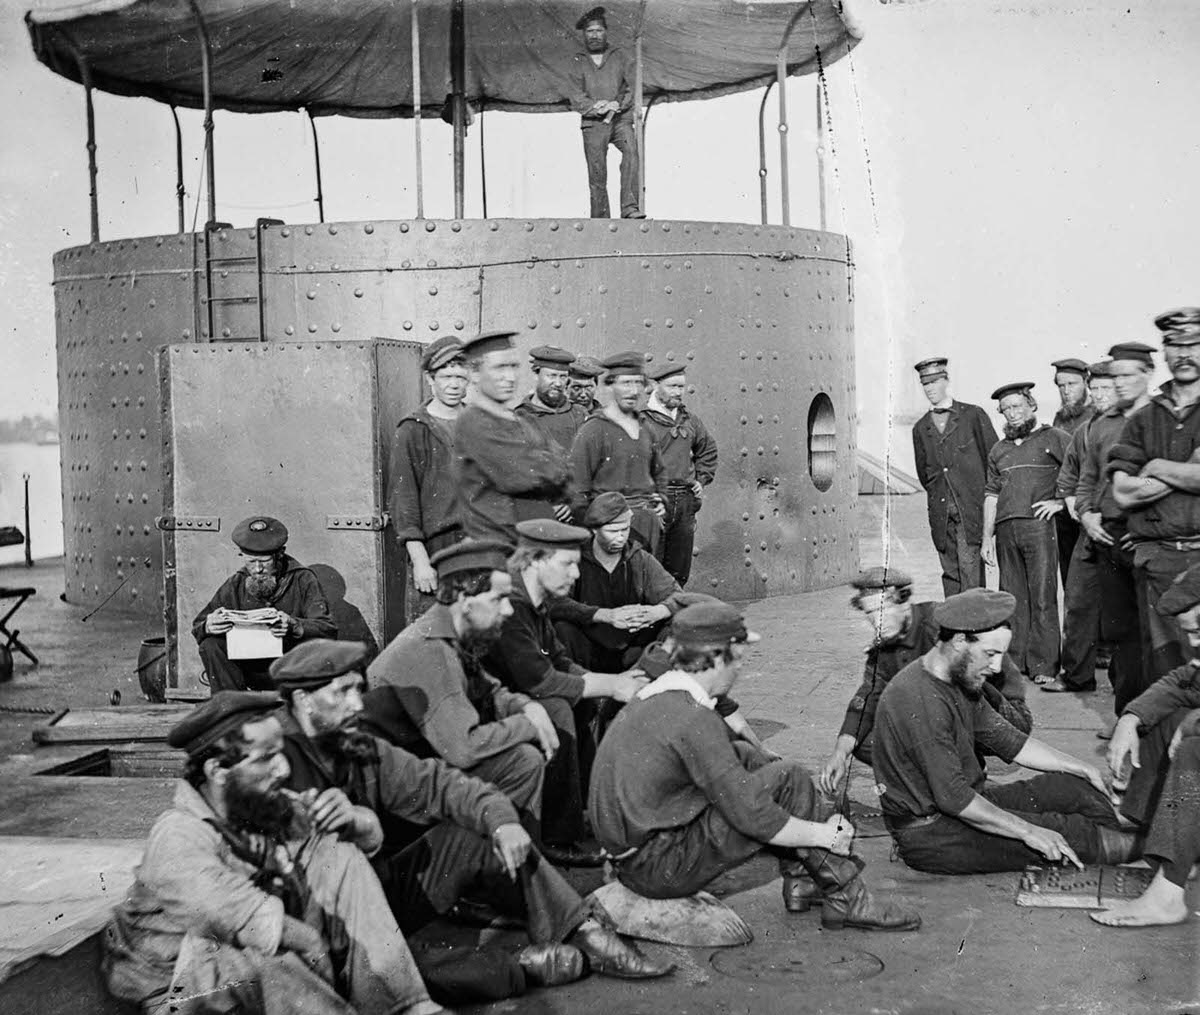 Sailors on the deck of a Monitor-class gunboat, 1864.